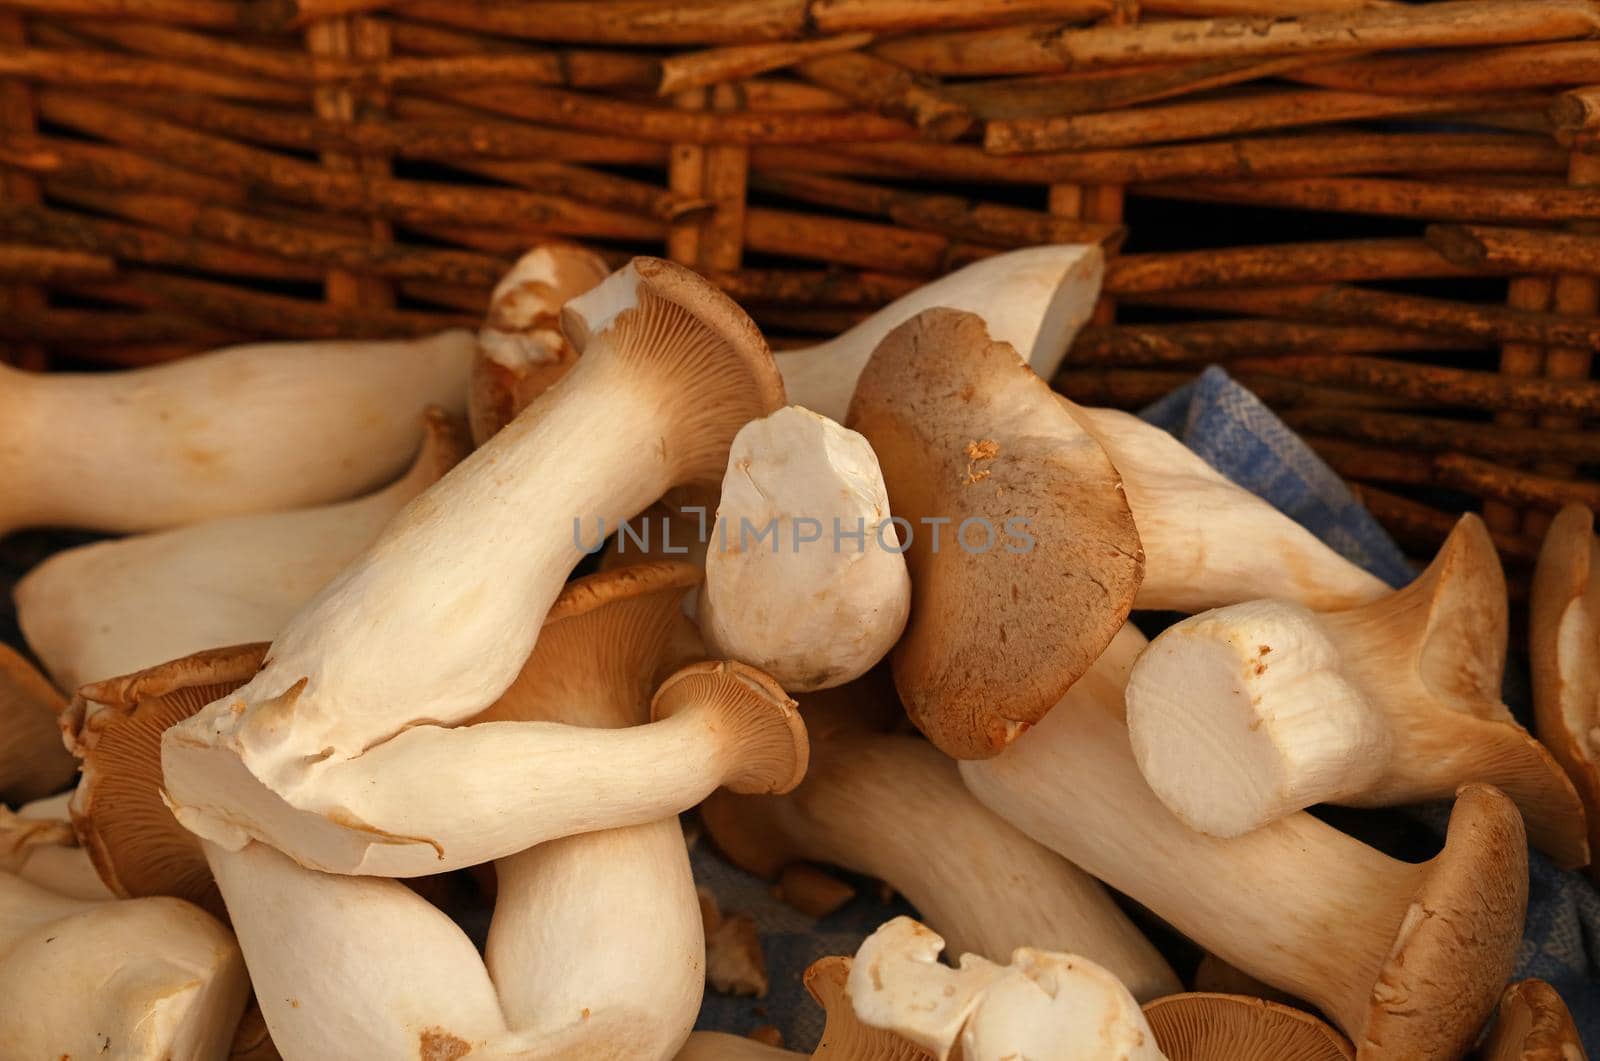 Close up king oyster mushrooms (Pleurotus eryngii, also known as brown trumpet or French horn mushrooms) in wicker wooden basket at retail display, high angle view